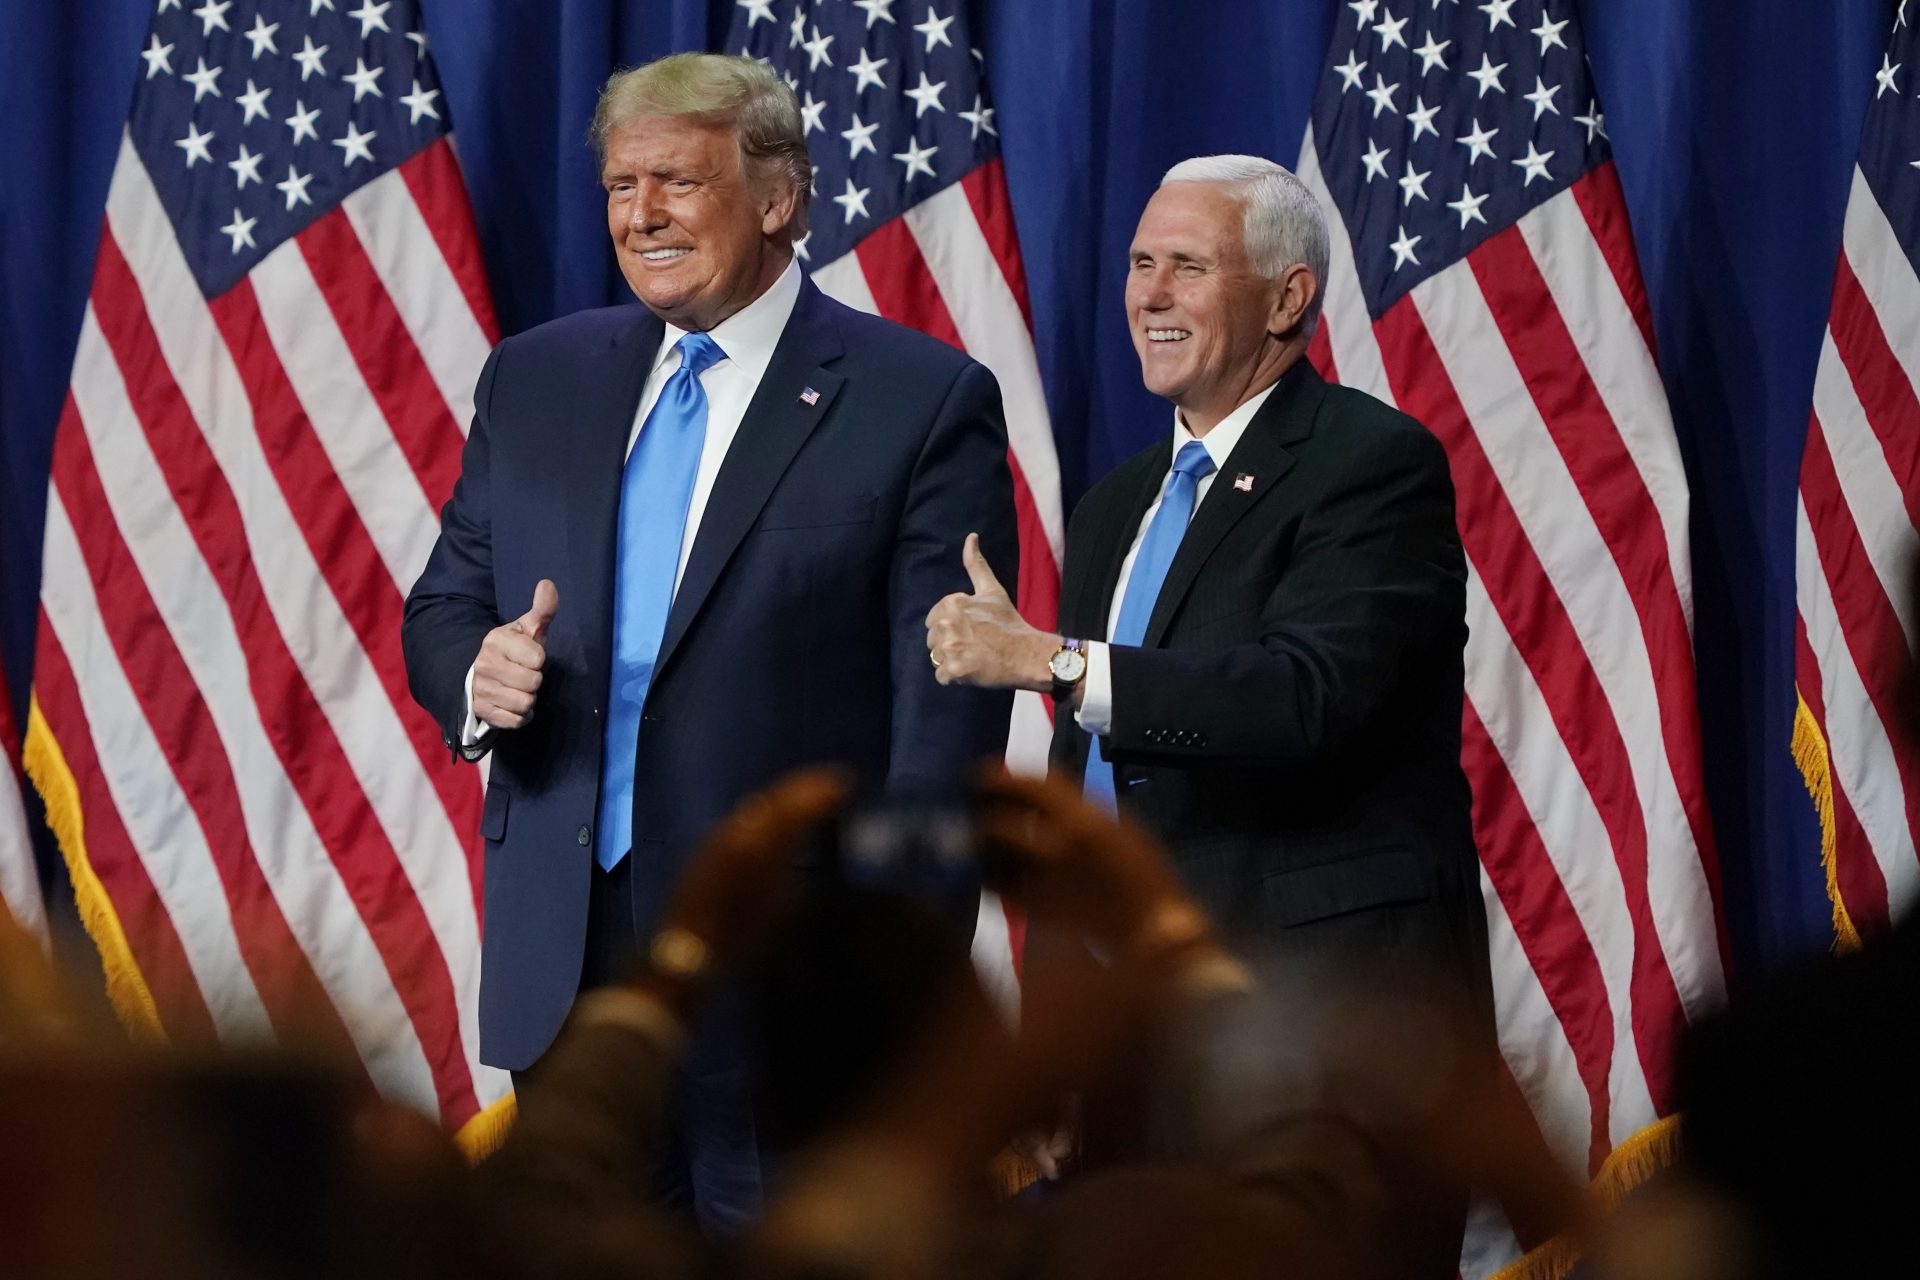 President Donald Trump and Vice President Mike Pence give a thumbs up after speaking during the first day of the Republican National Convention Monday, Aug. 24, 2020, in Charlotte, N.C.